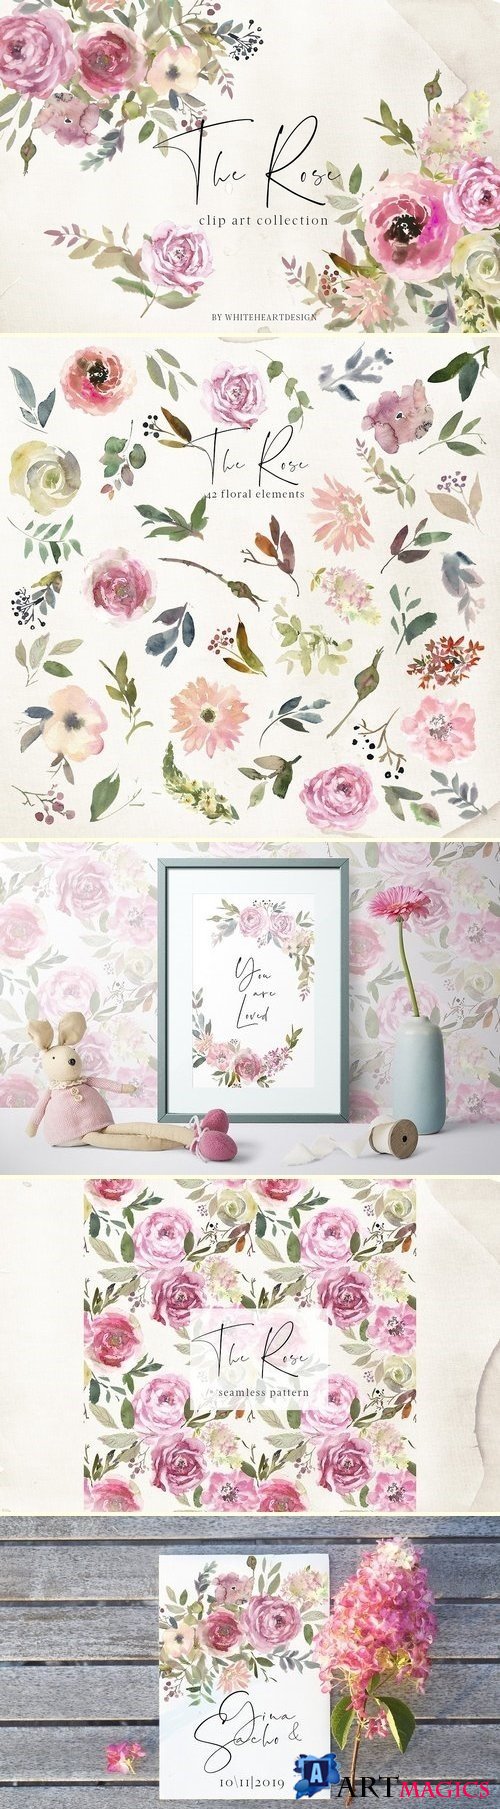 The Rose Watercolor Floral Clipart - 2888705